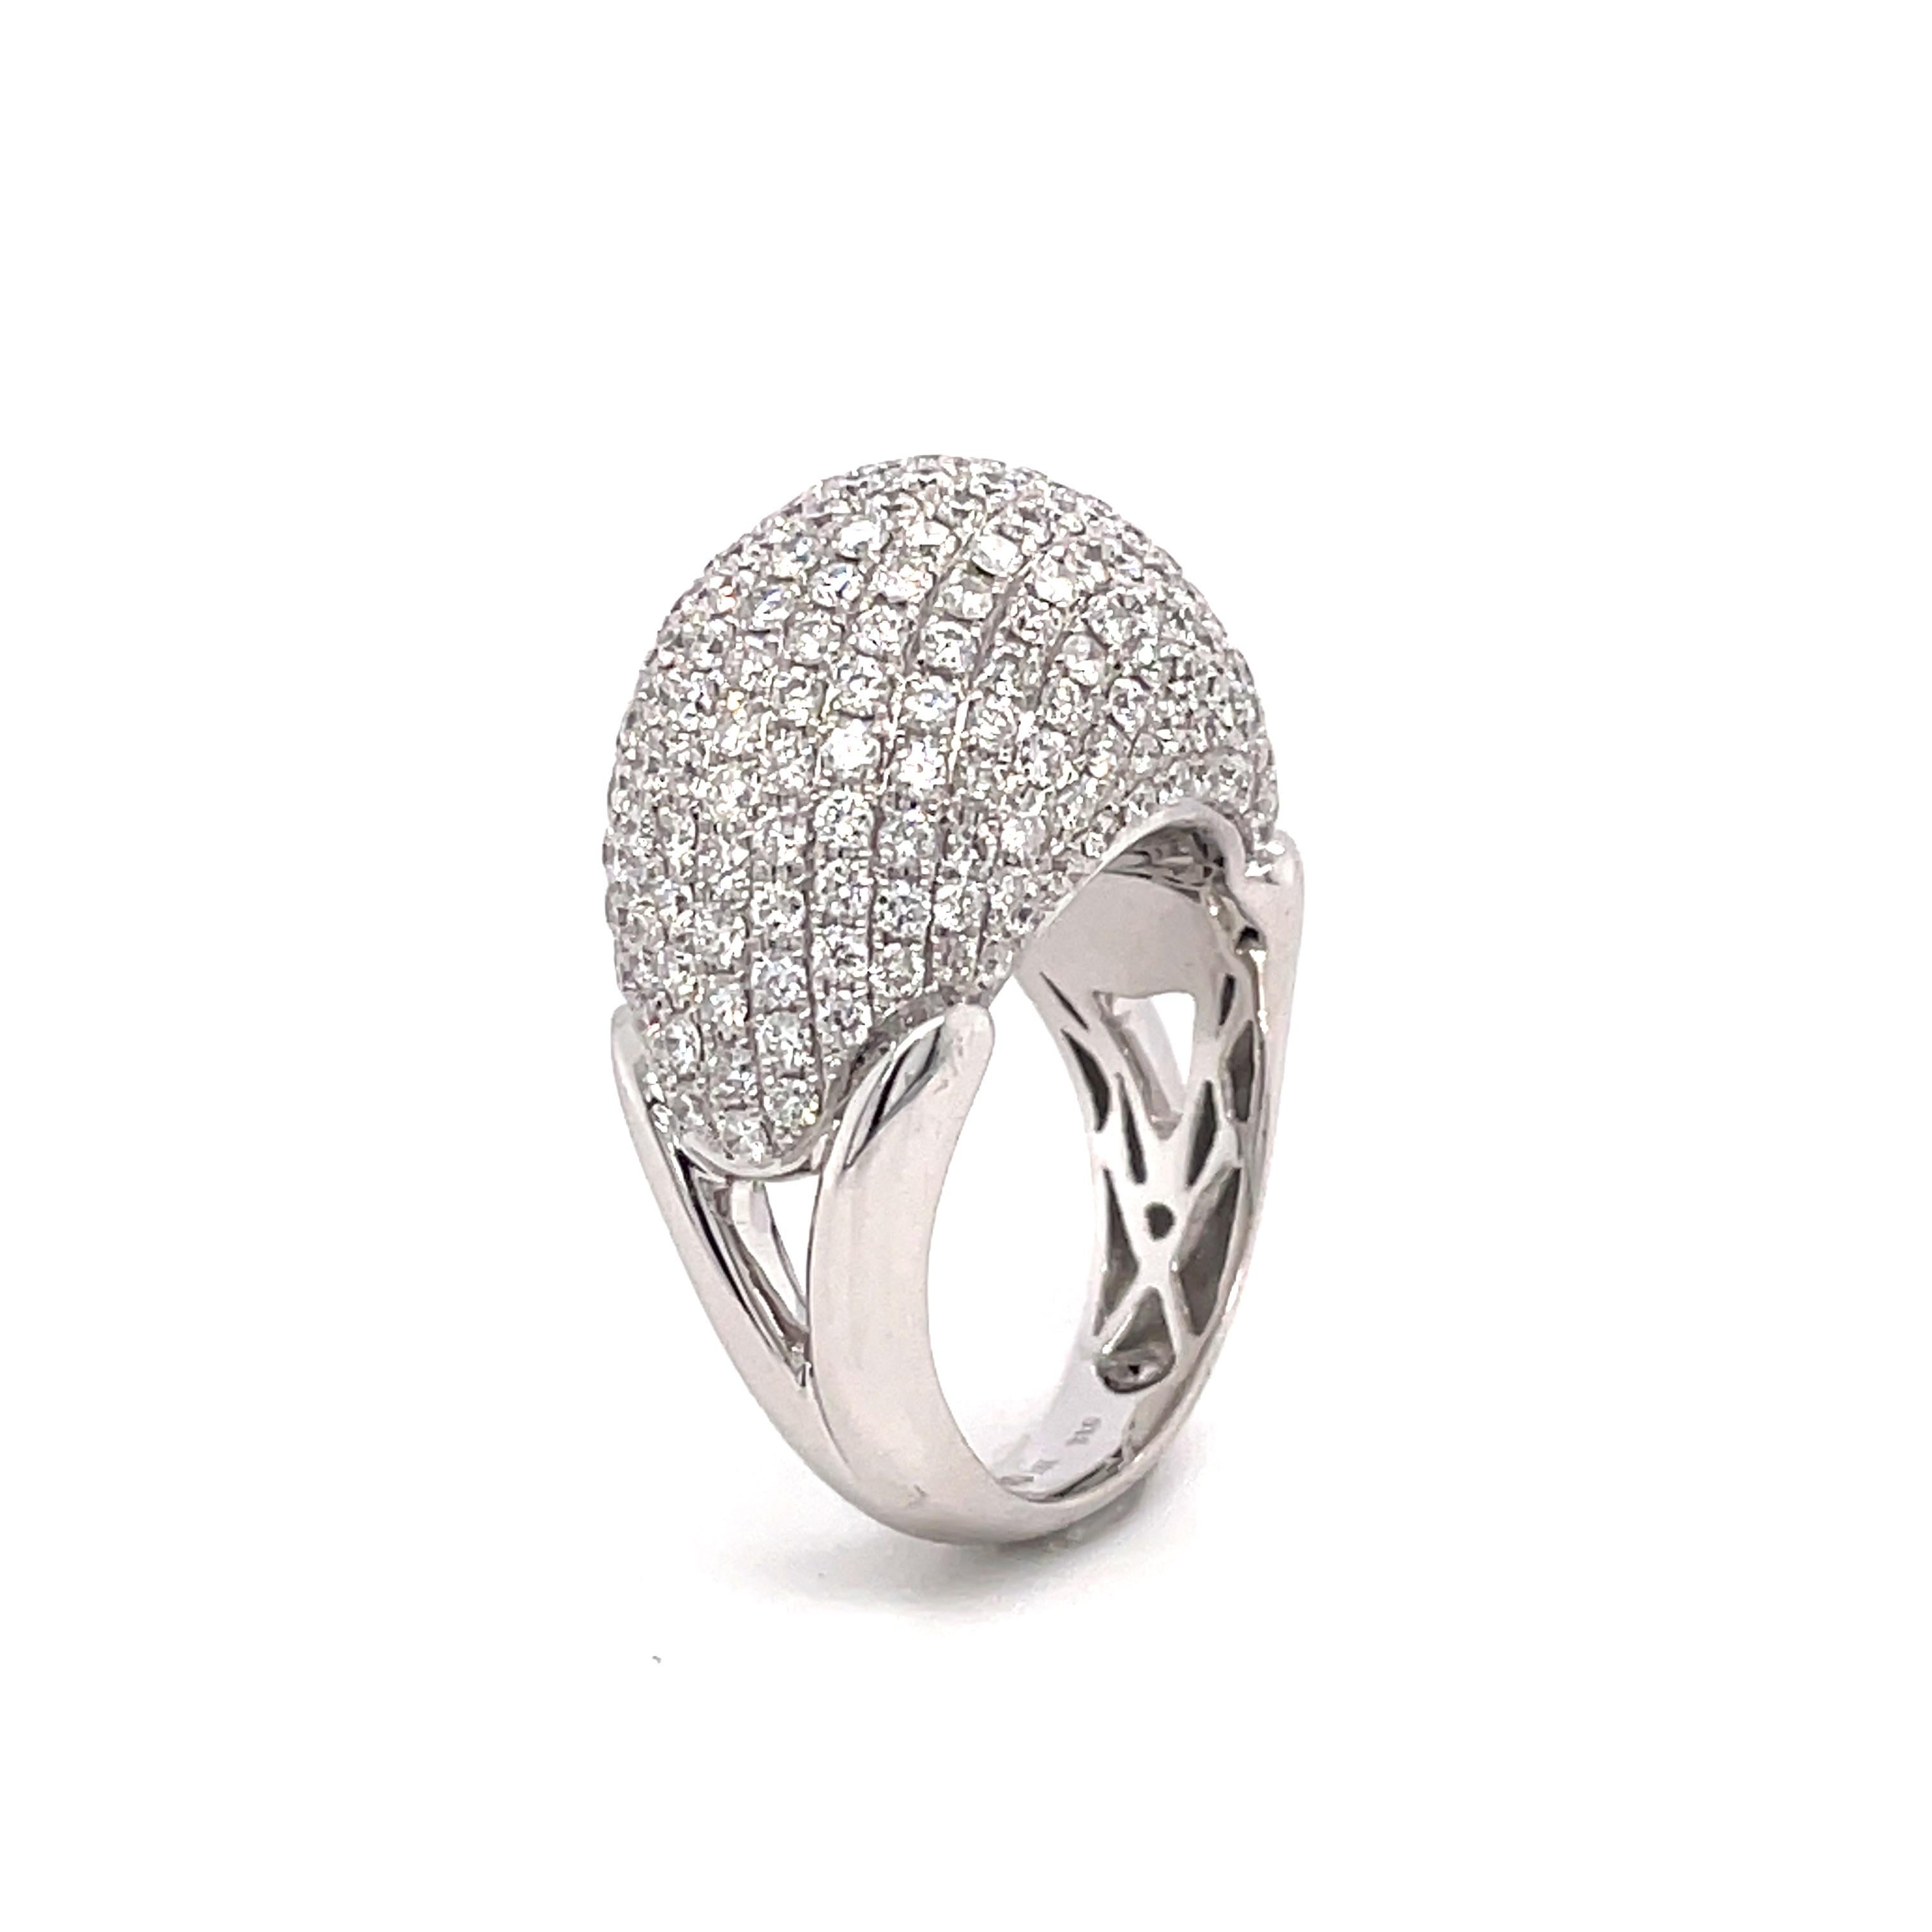 18Kt White Gold 3.10ct Diamond Cocktail Ring In Excellent Condition For Sale In New York, NY